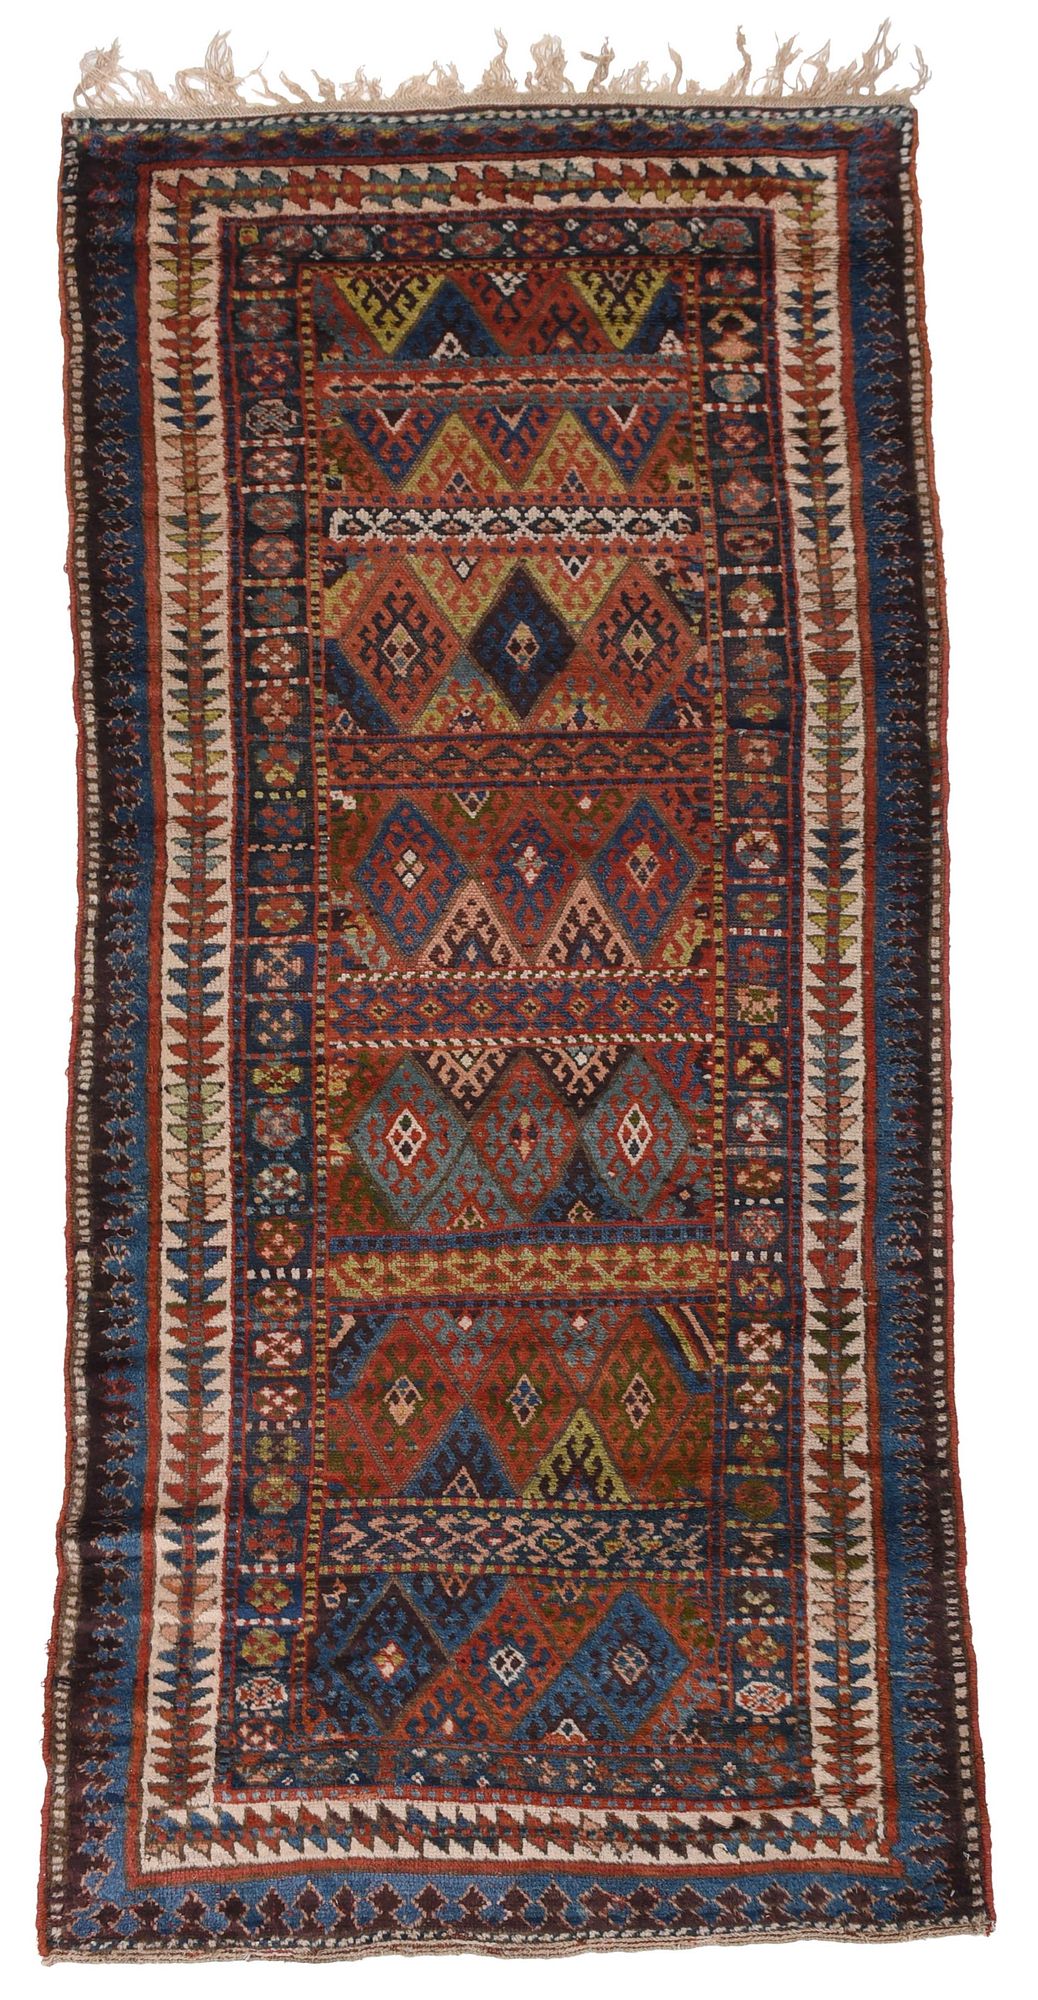 Kurdish Rug for sale at auction on 8th March